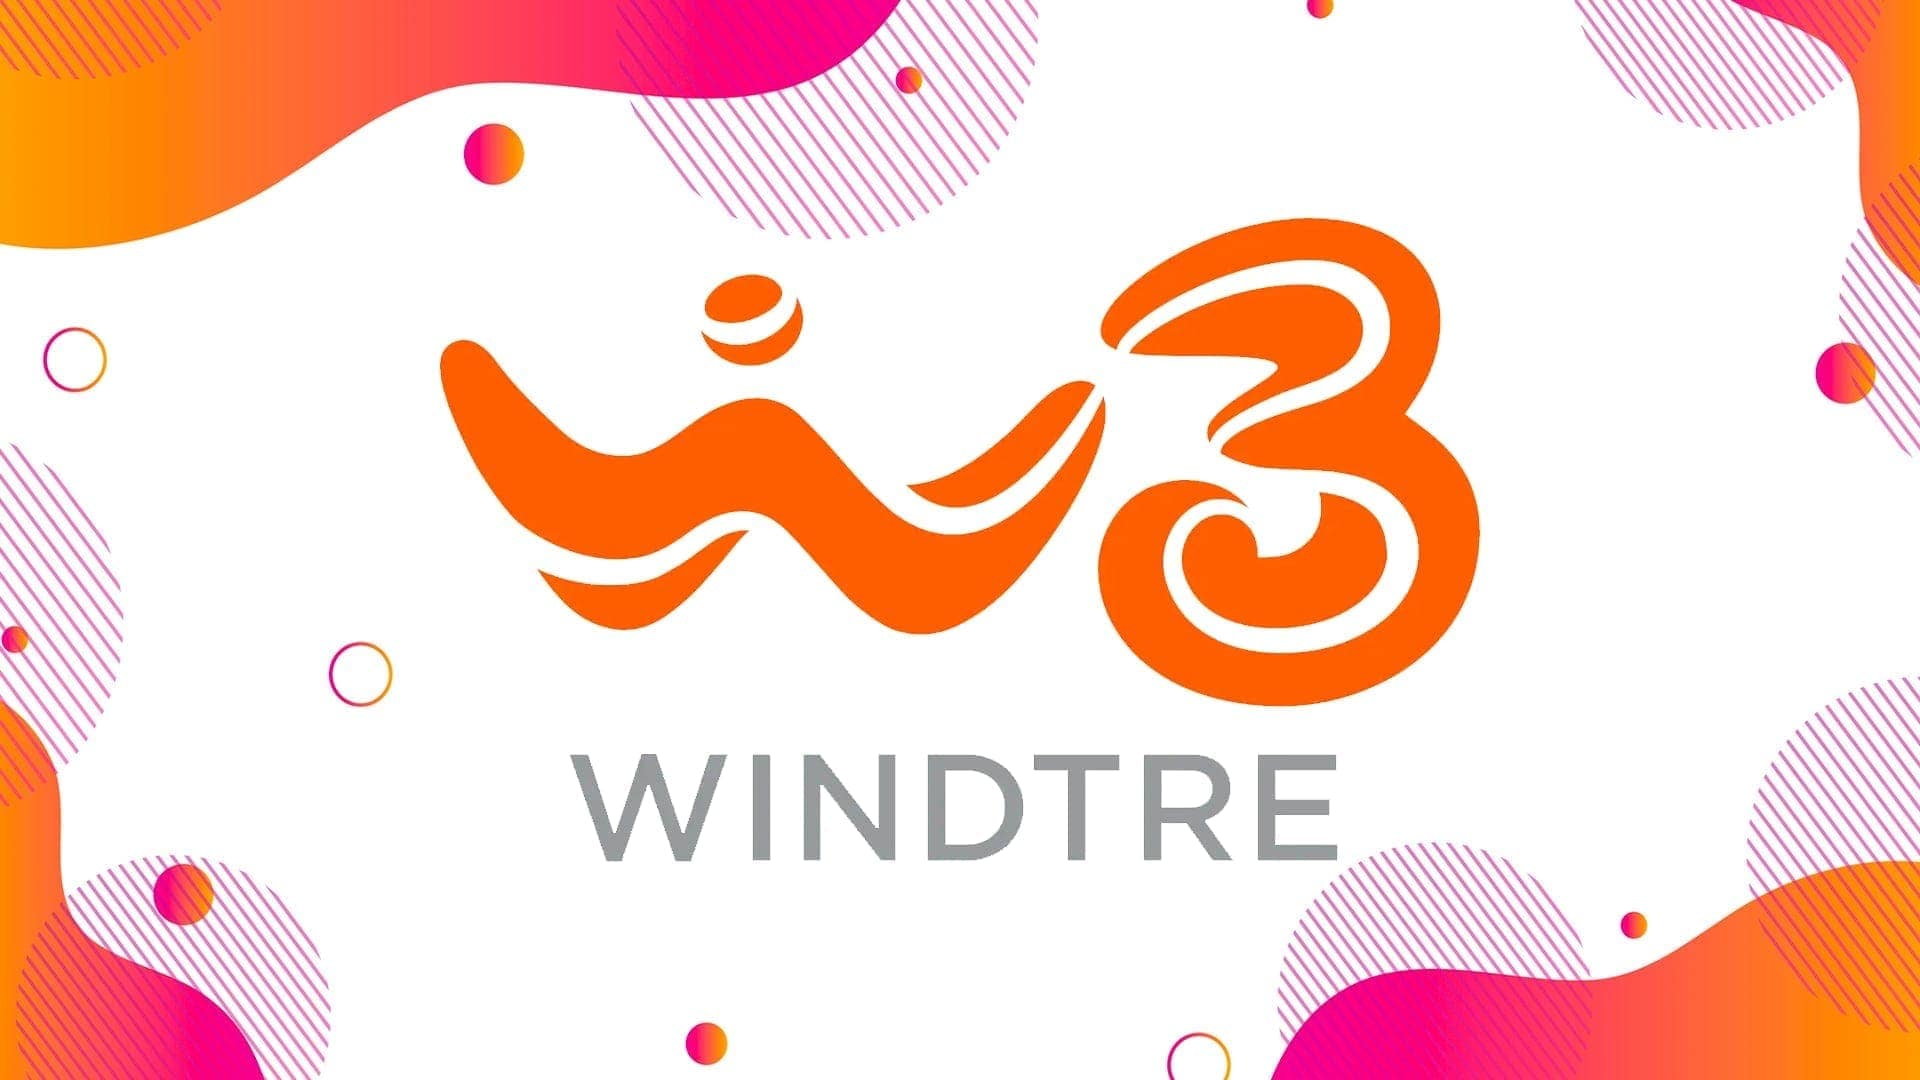 Windre offers 5G to some of its customers: Are you there too?